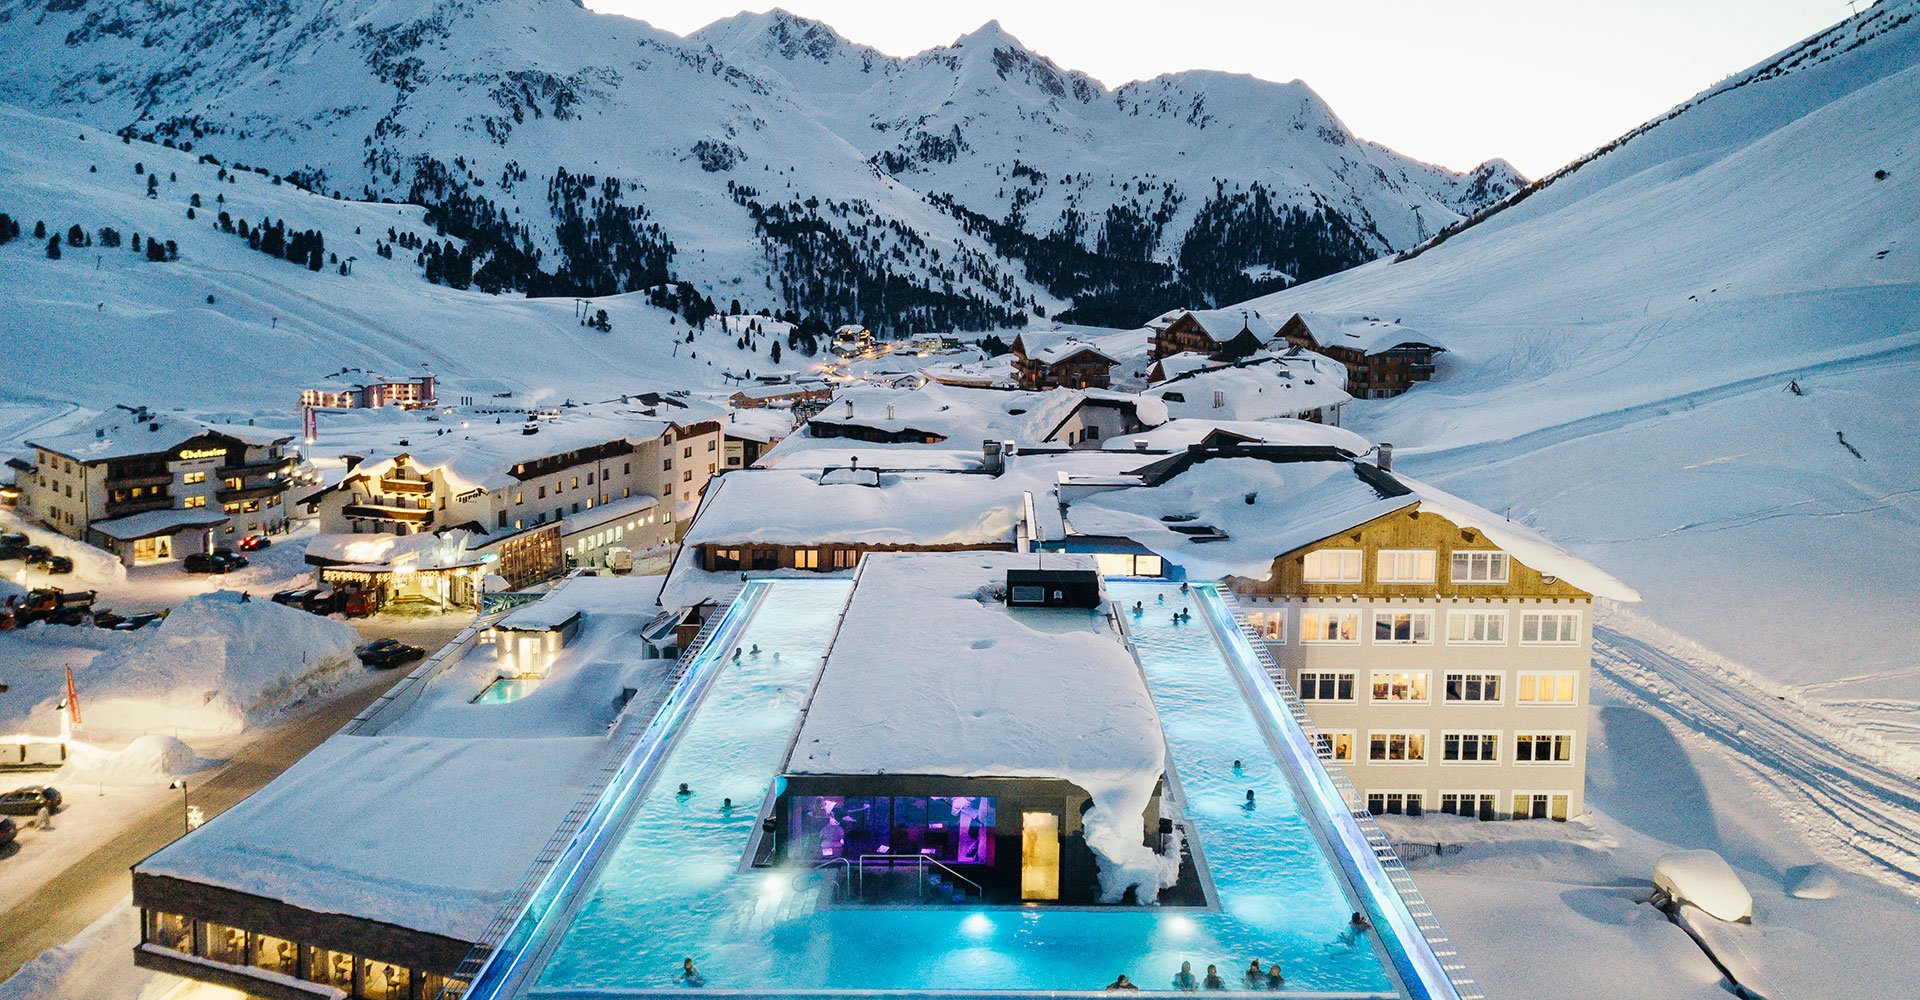 Endless Sky Pool on the 5th floor at the Mooshaus in the Austrian Alps.